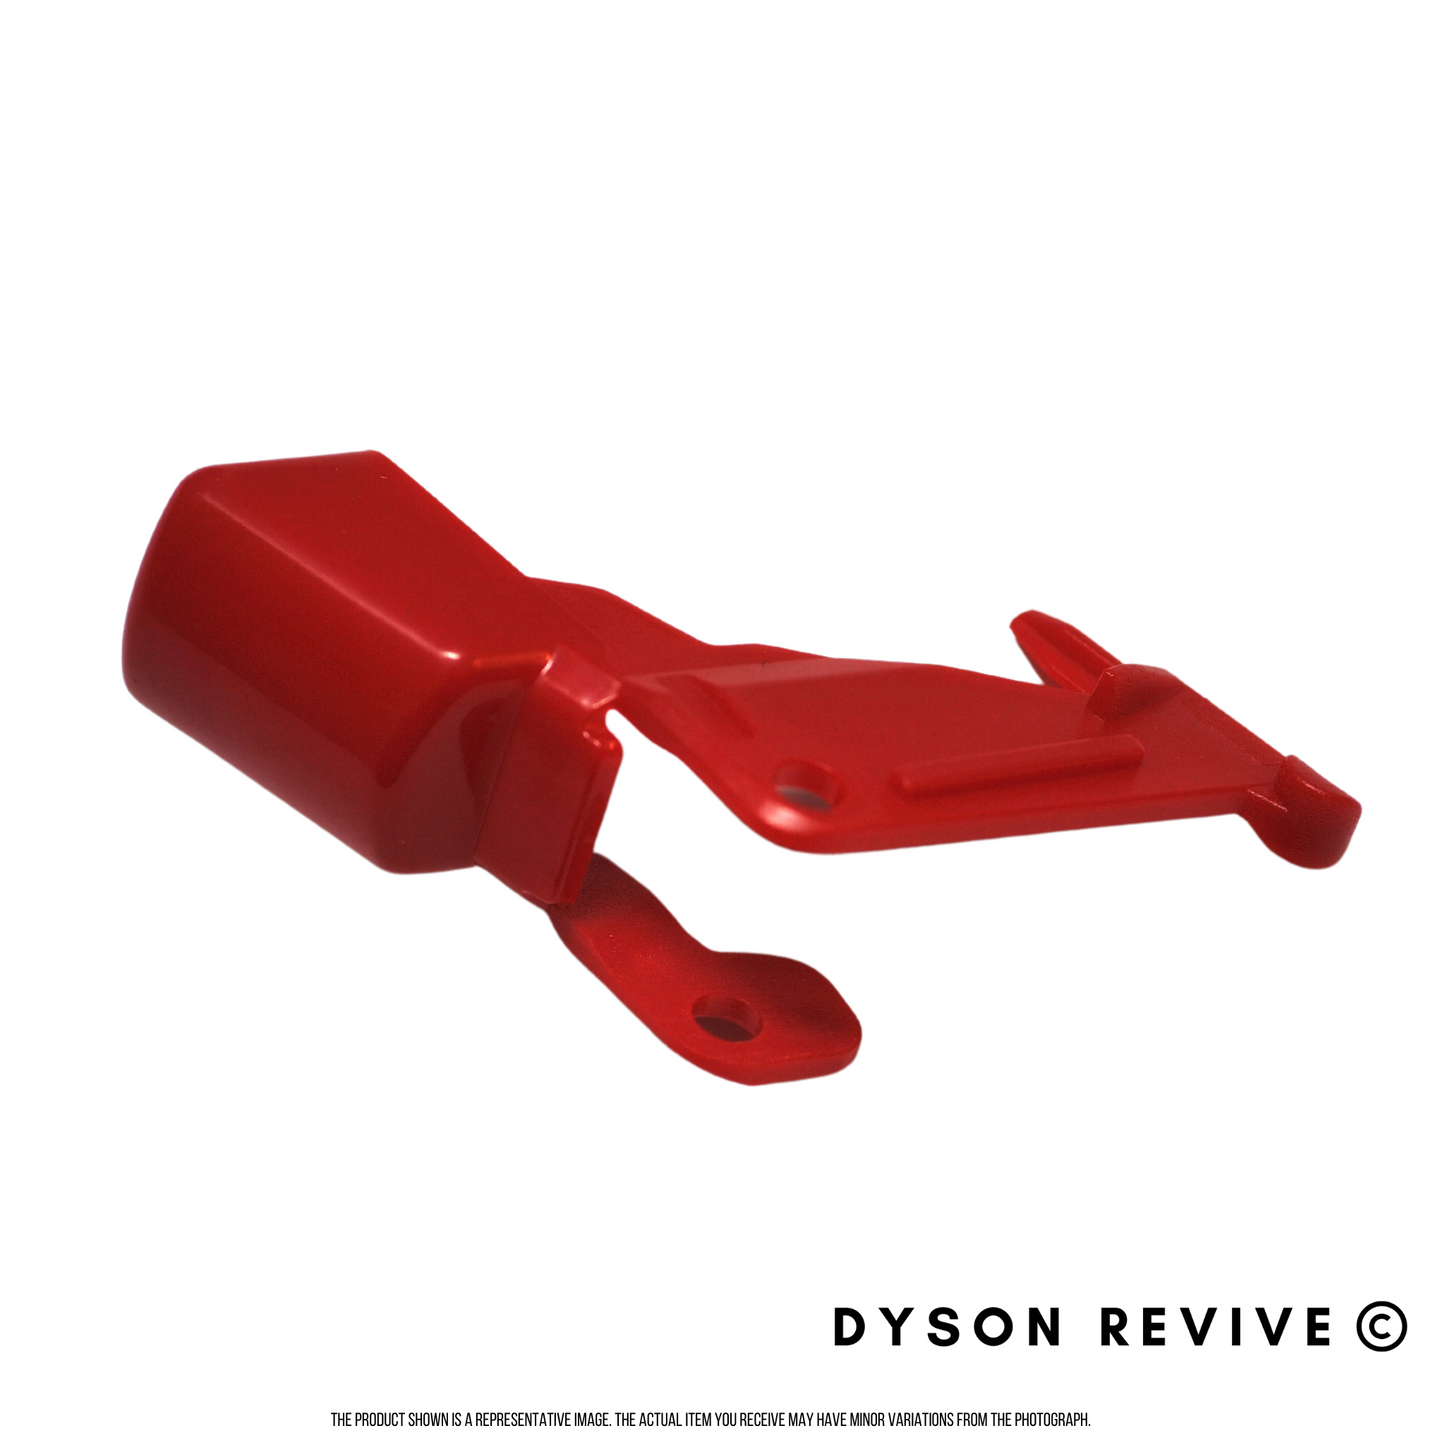 Strong Power Trigger Switch Replacement Part for All Dyson V10 & V11 Vacuum Cleaner Models - Dyson Revive